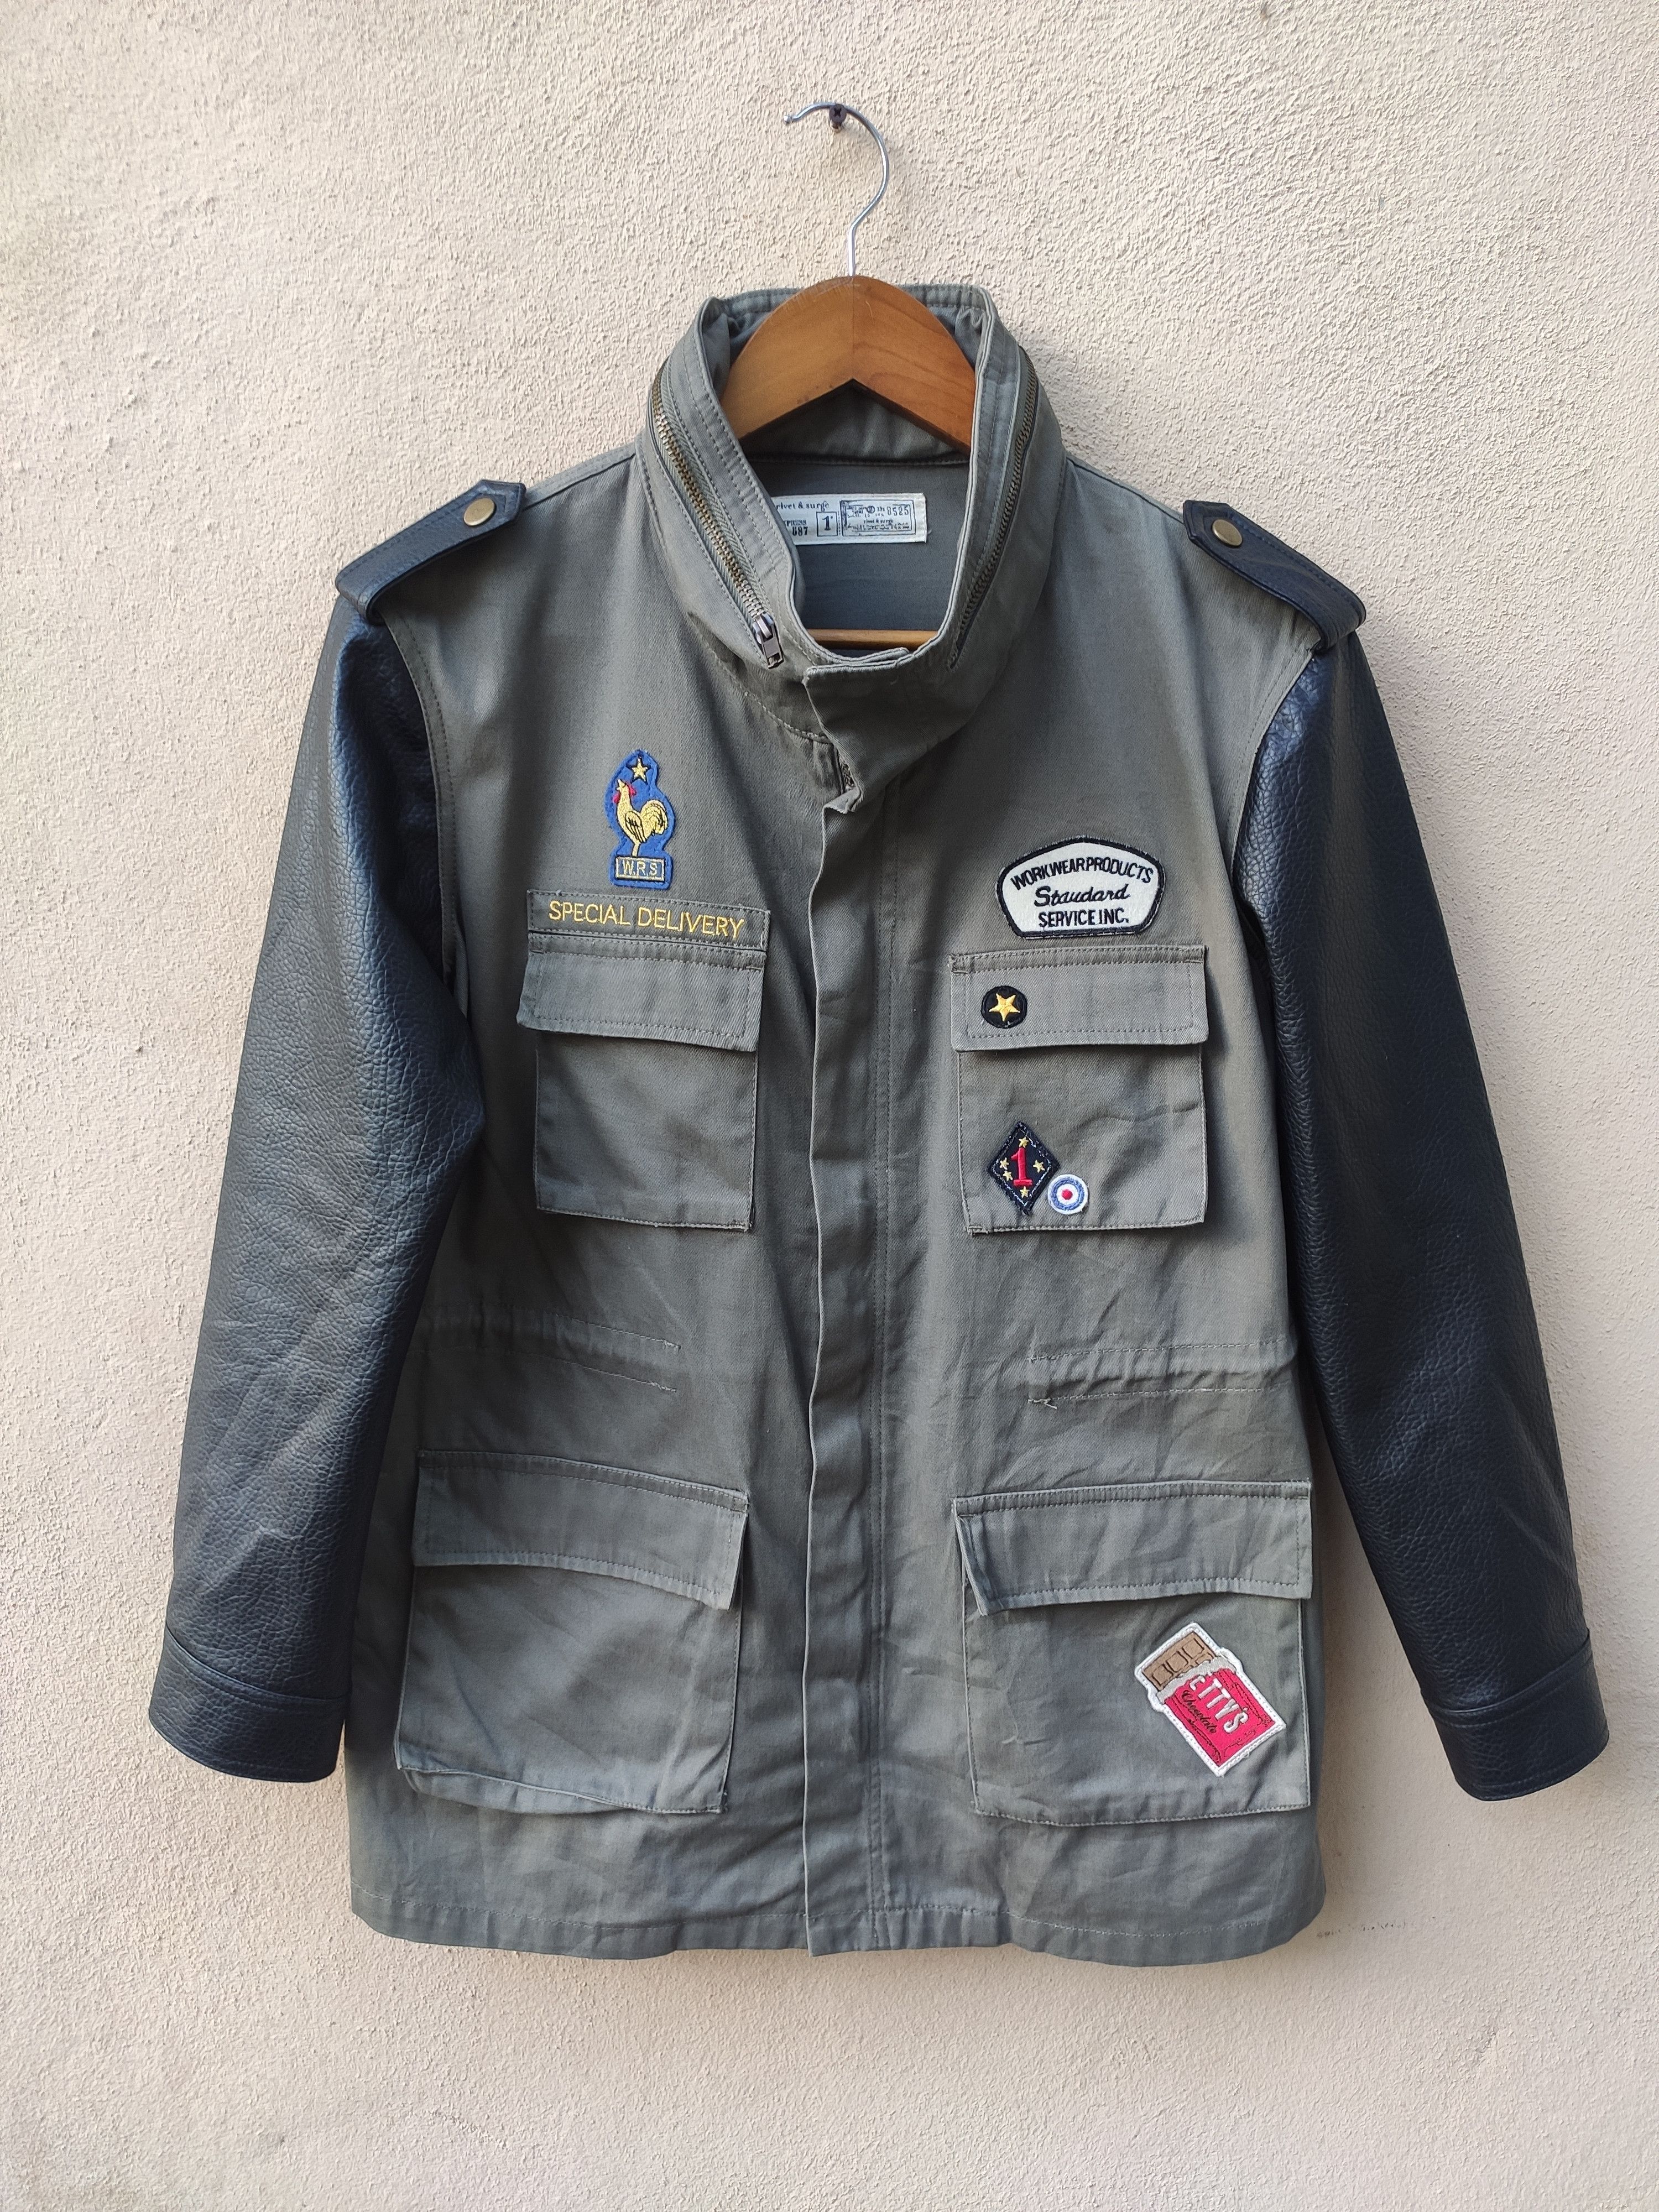 Japanese Brand Rivet and Surge jacket with patches | Grailed